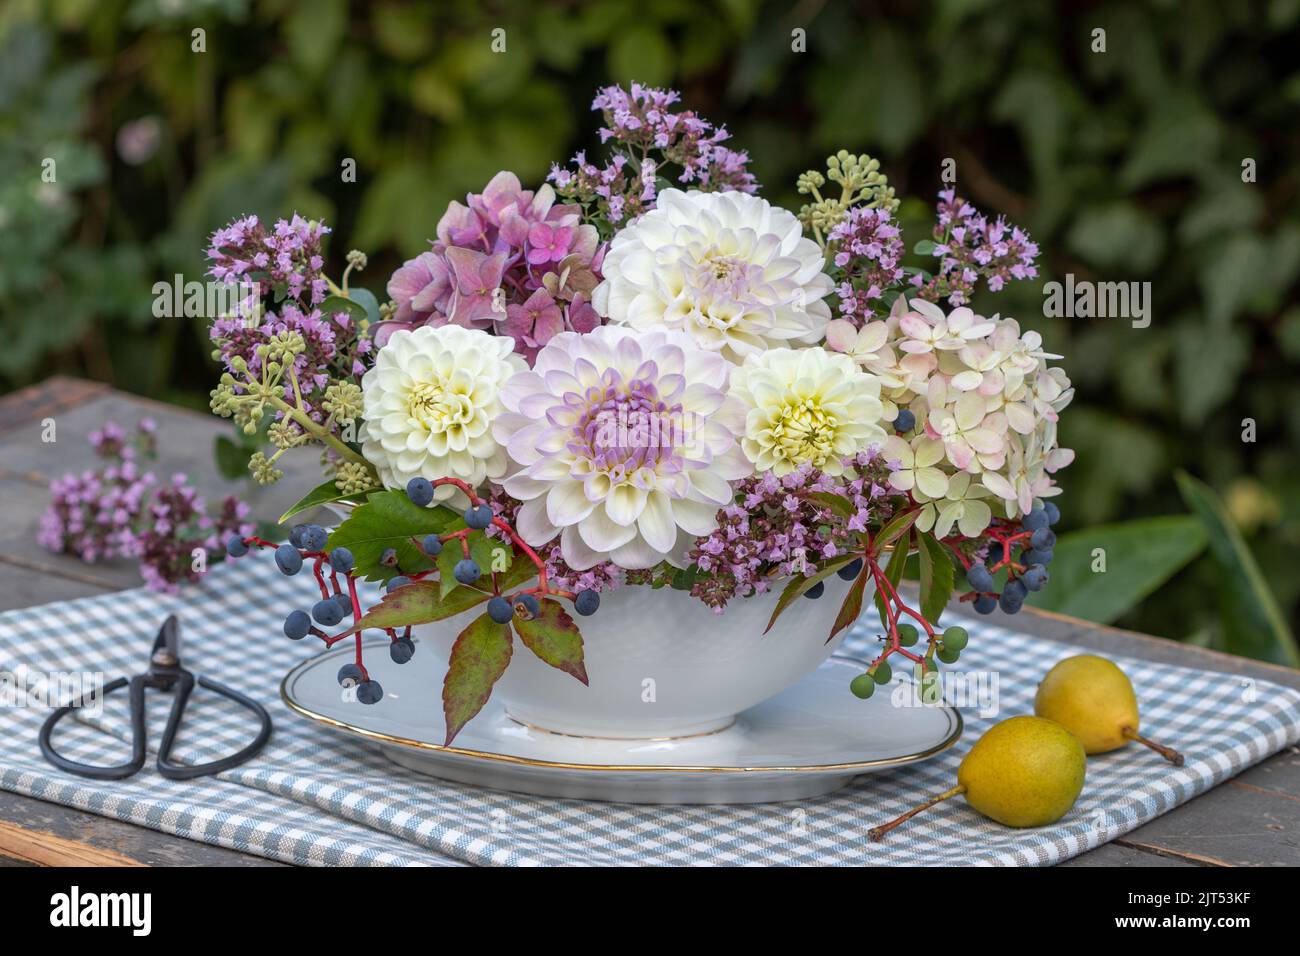 floral arrangement with white and purple dahlias, hydrangea flowers and wild thyme in vintage sauciere Stock Photo